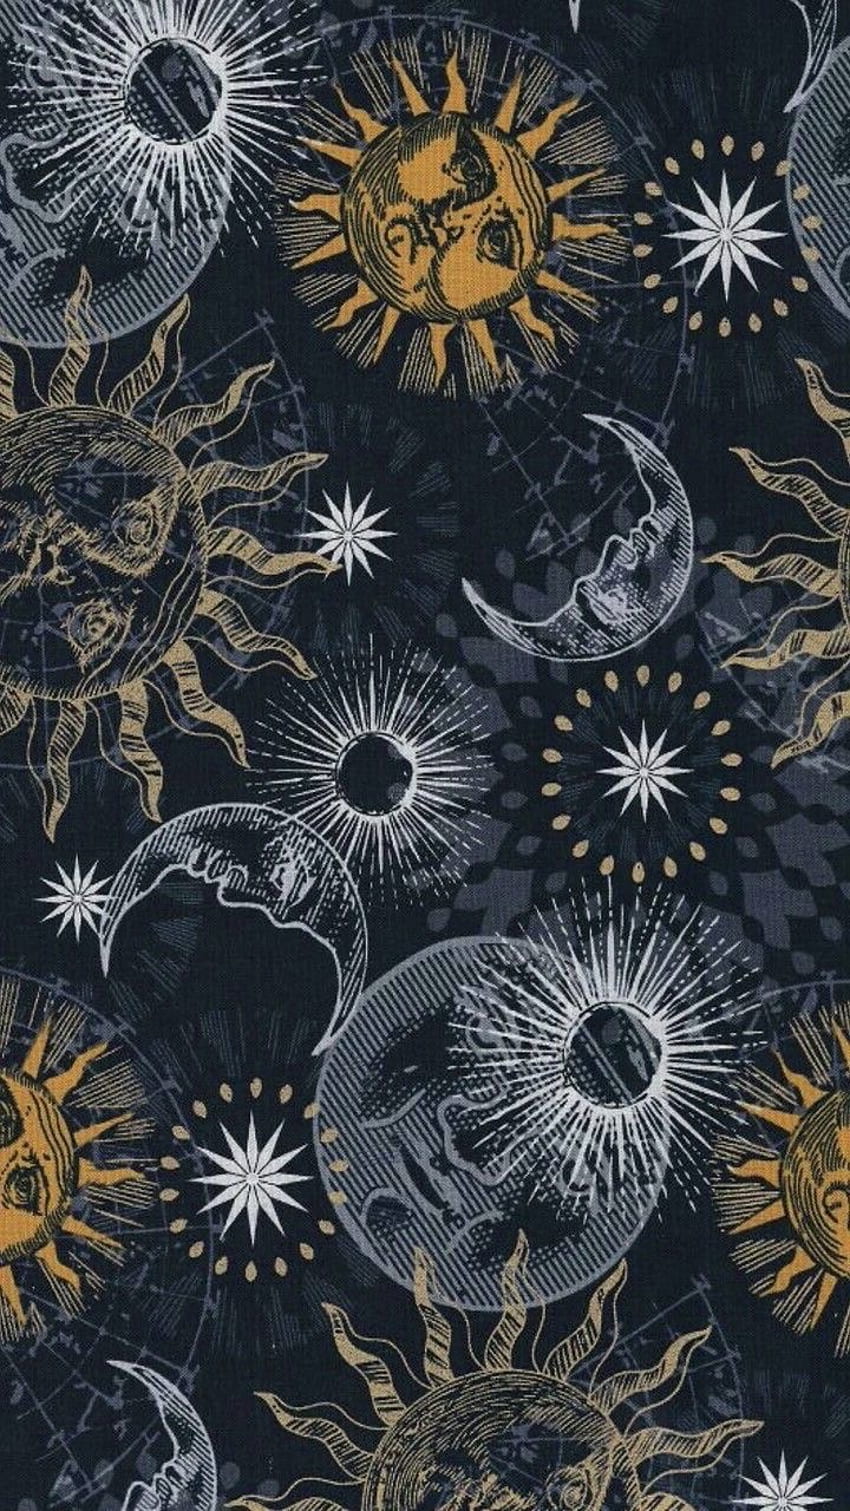 A pattern of suns and stars on black fabric - Sun